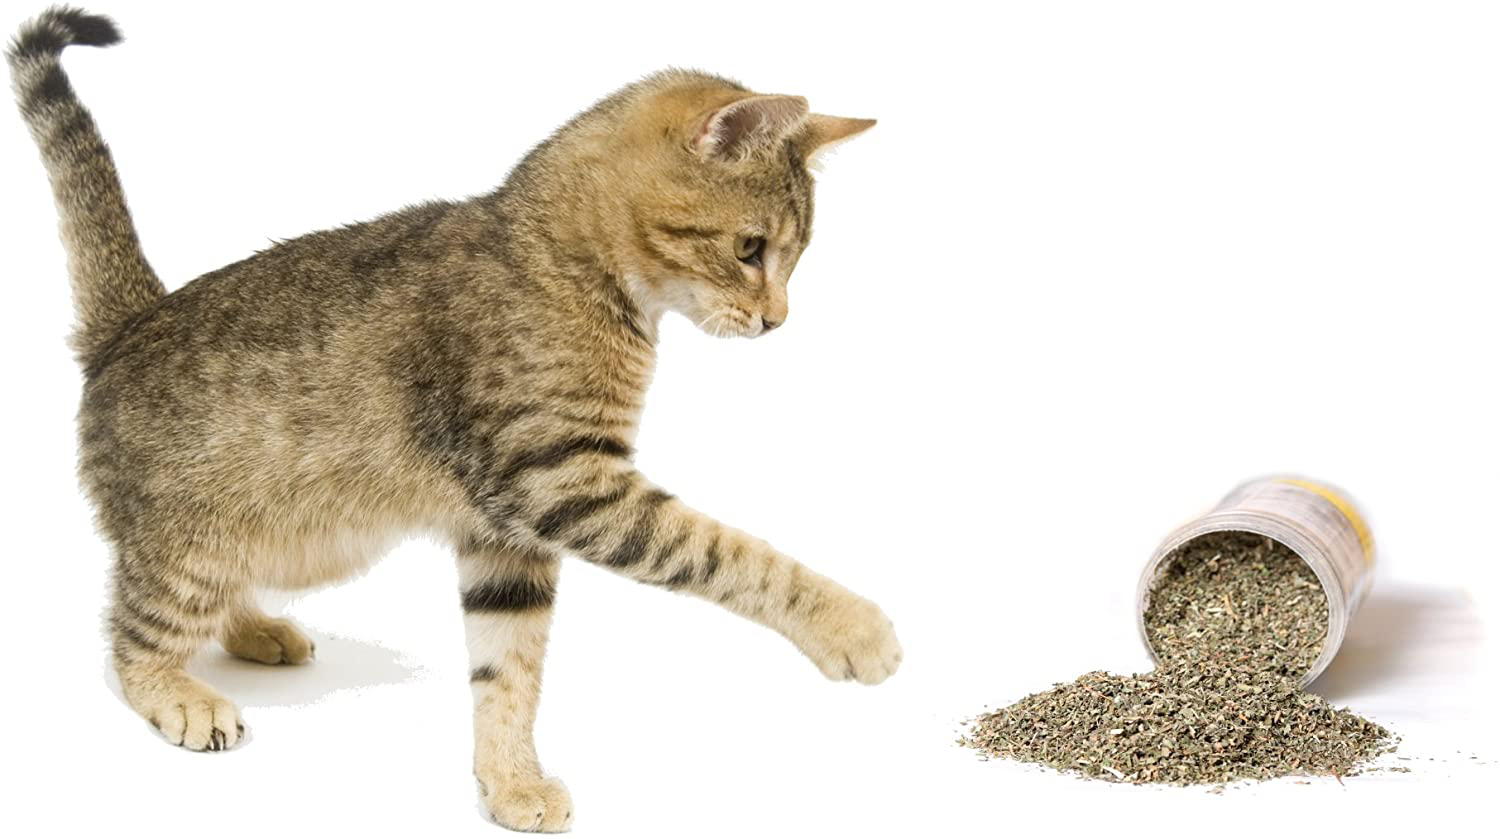 Cat Crack Catnip, Premium Blend Safe for Cats, Infused with Maximum Potency Your Kitty Is Sure to Go Crazy For